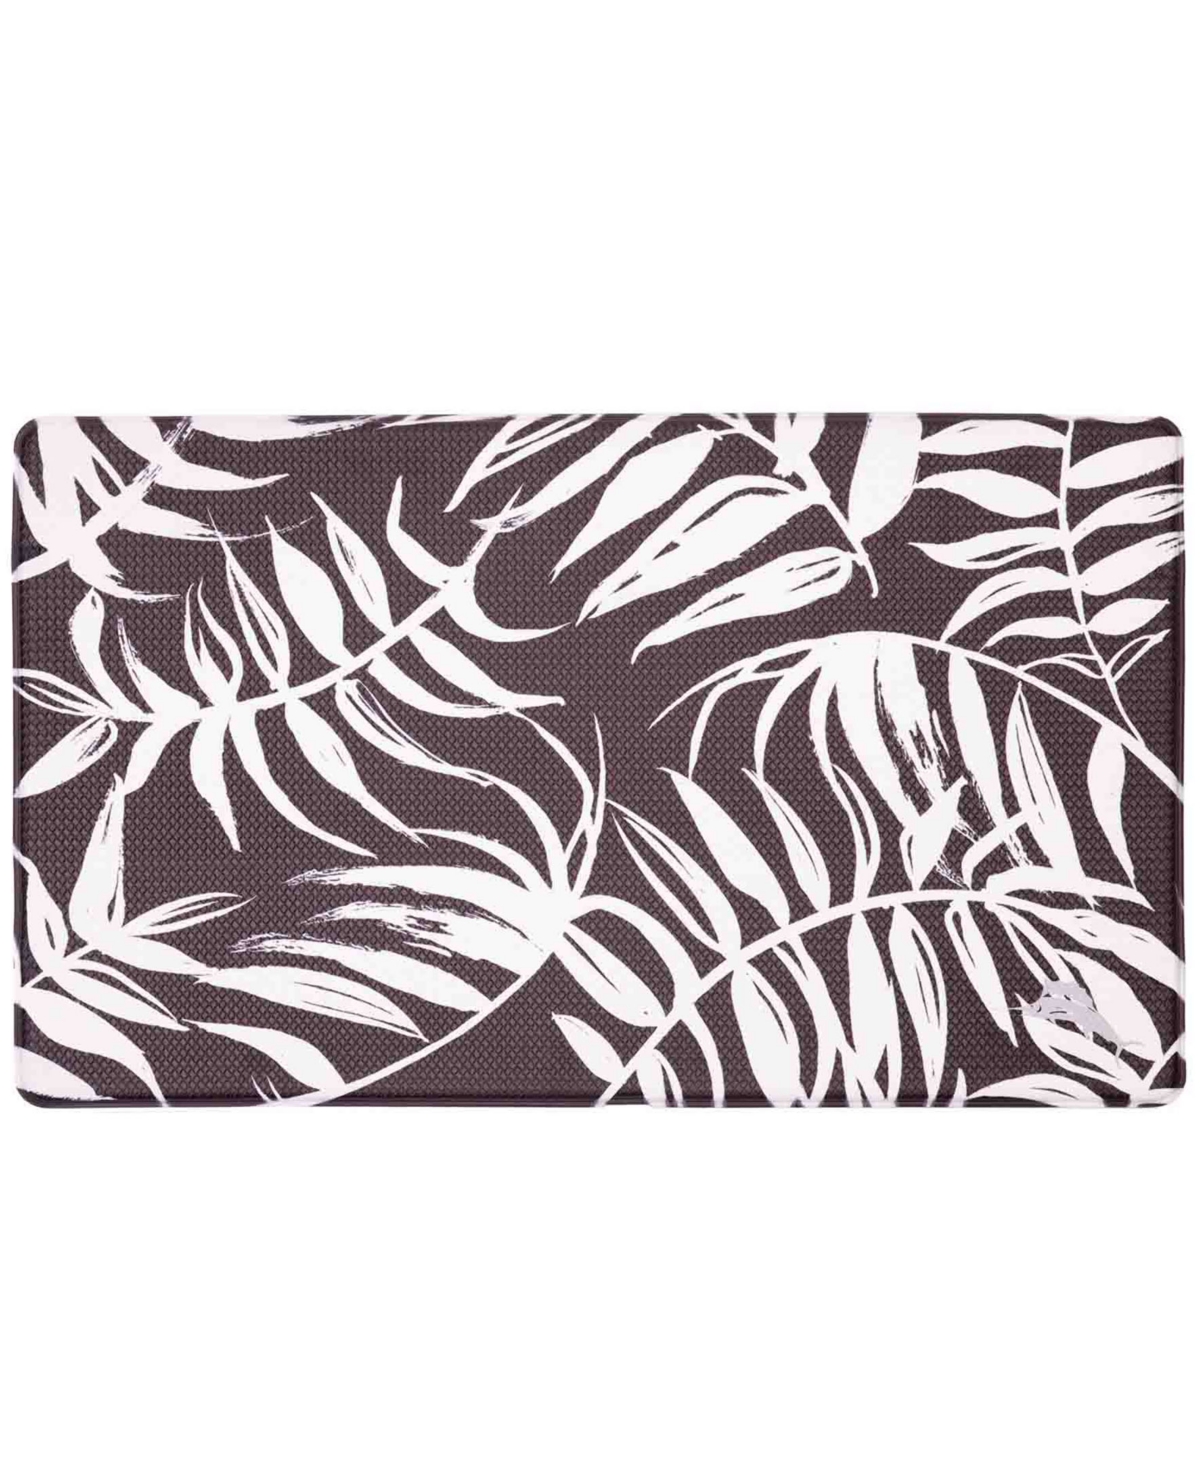 Tommy Bahama 20" X 36" Printed Polyvinyl Chloride Fatigue-resistant Mat In Midnight Leaves